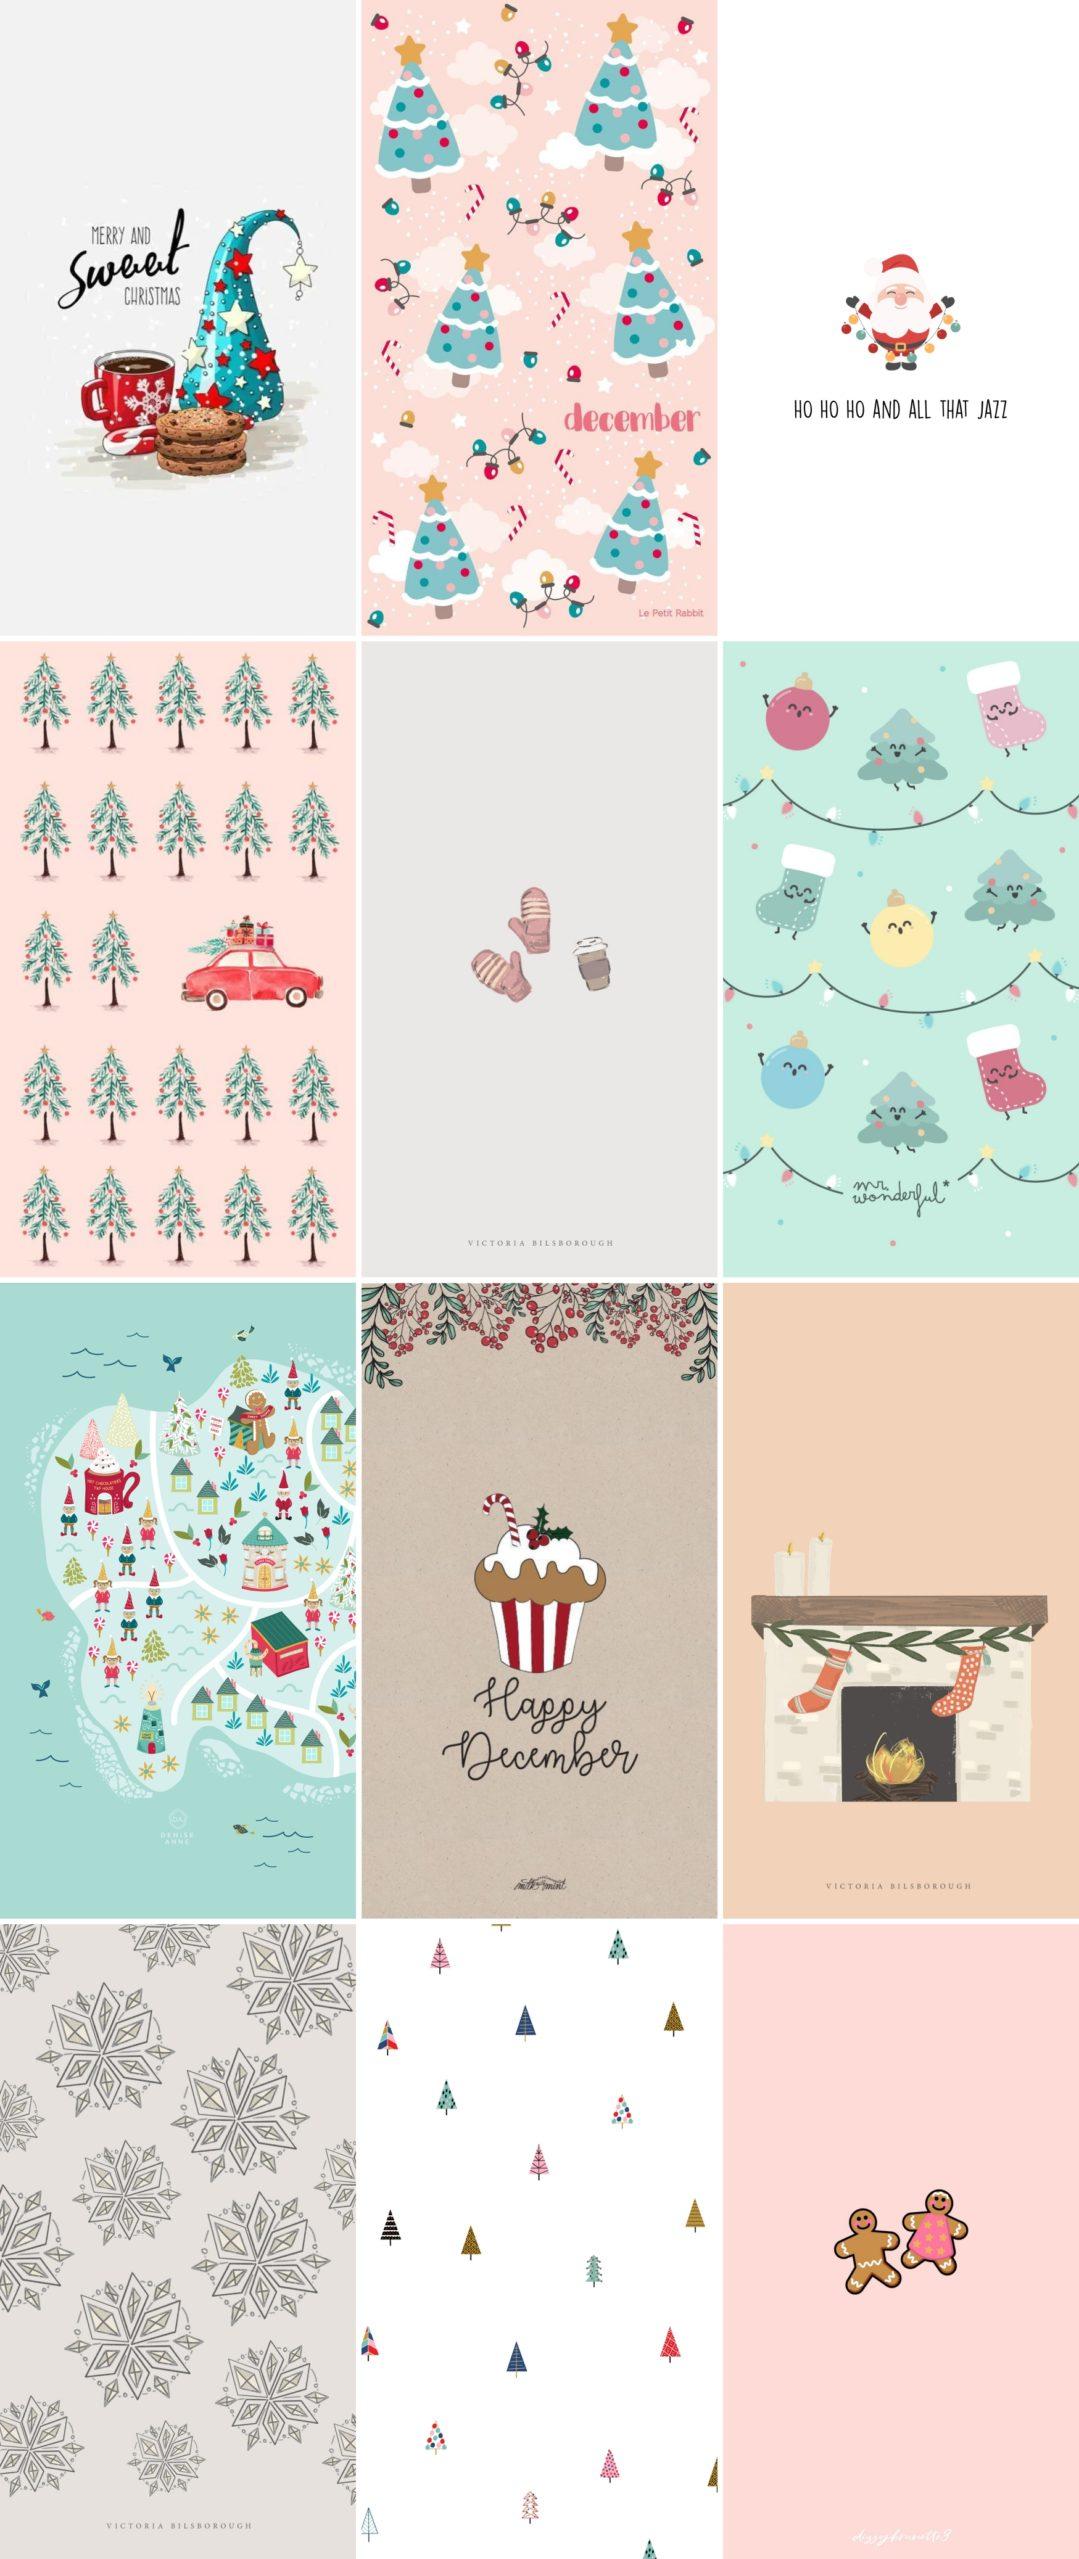  Free Christmas Themed Phone Wallpapers For The Festive Season